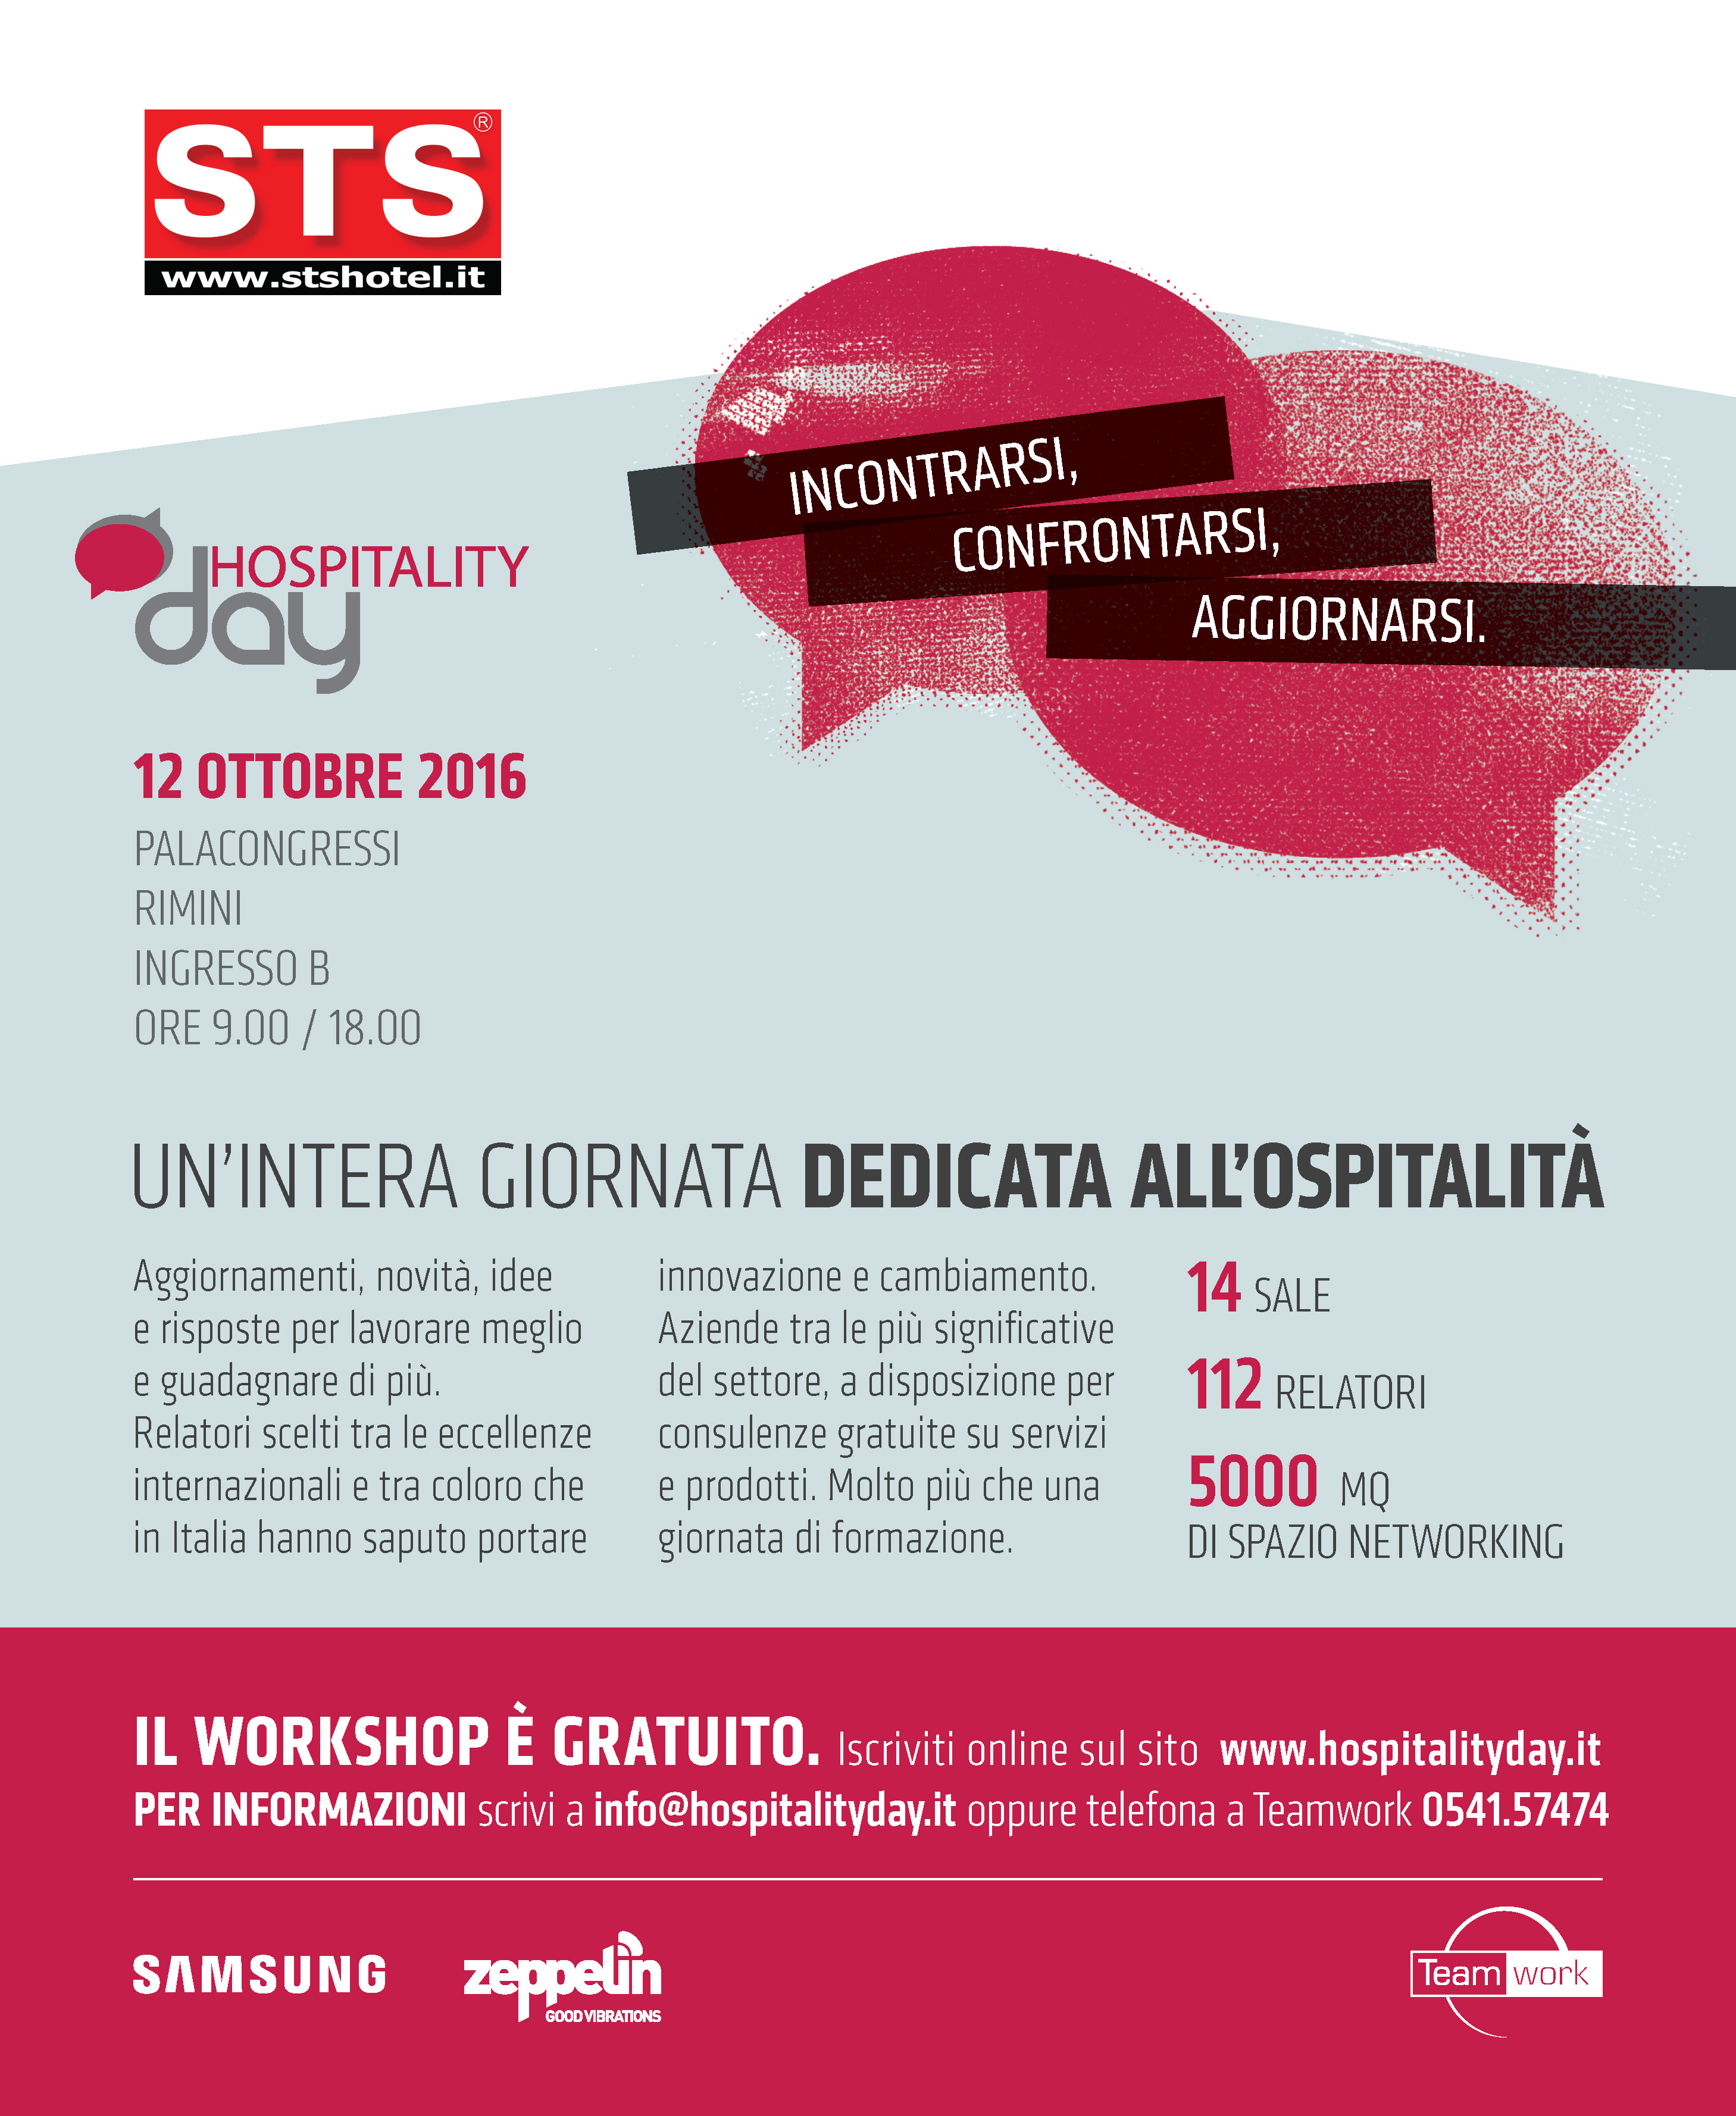 STS Hotel all’Hospitality Day 2016